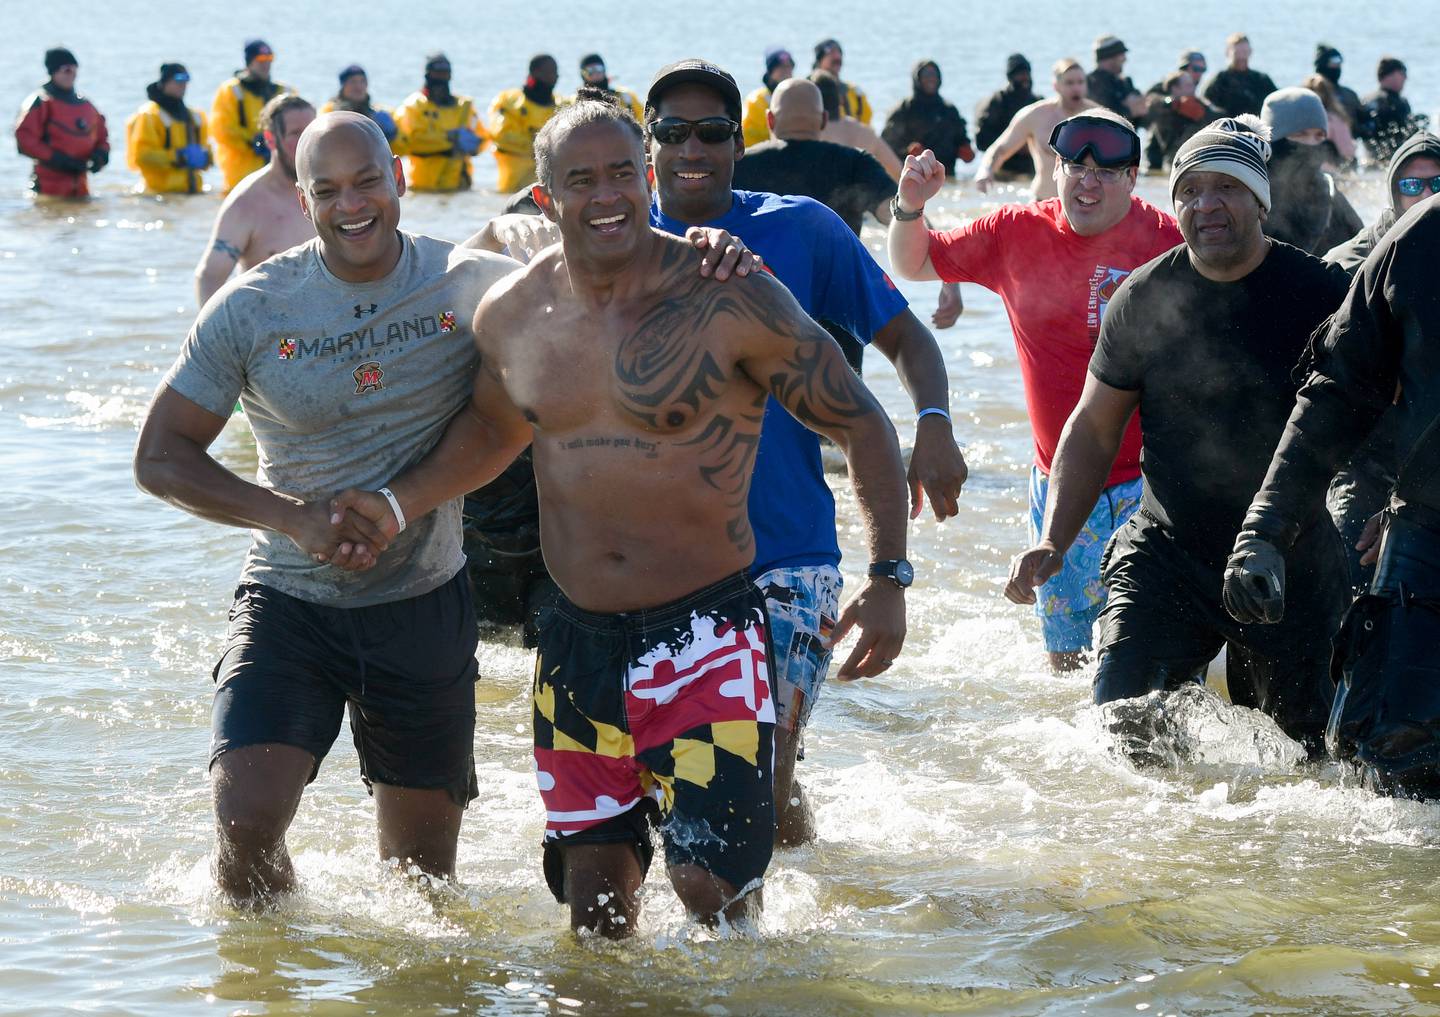 Gov. Wes Moore, from left, Delegate C.T. Wilson of Charles County, Special Olympics athlete Annu Singleton, of Baltimore, and Special Olympics athlete Adam Hays, of Frederick, participate in the Maryland State Police Polar Bear Plunge to benefit Special Olympics Maryland, Saturday, Feb. 4, 2023 at Sandy Point State Park in Annapolis.